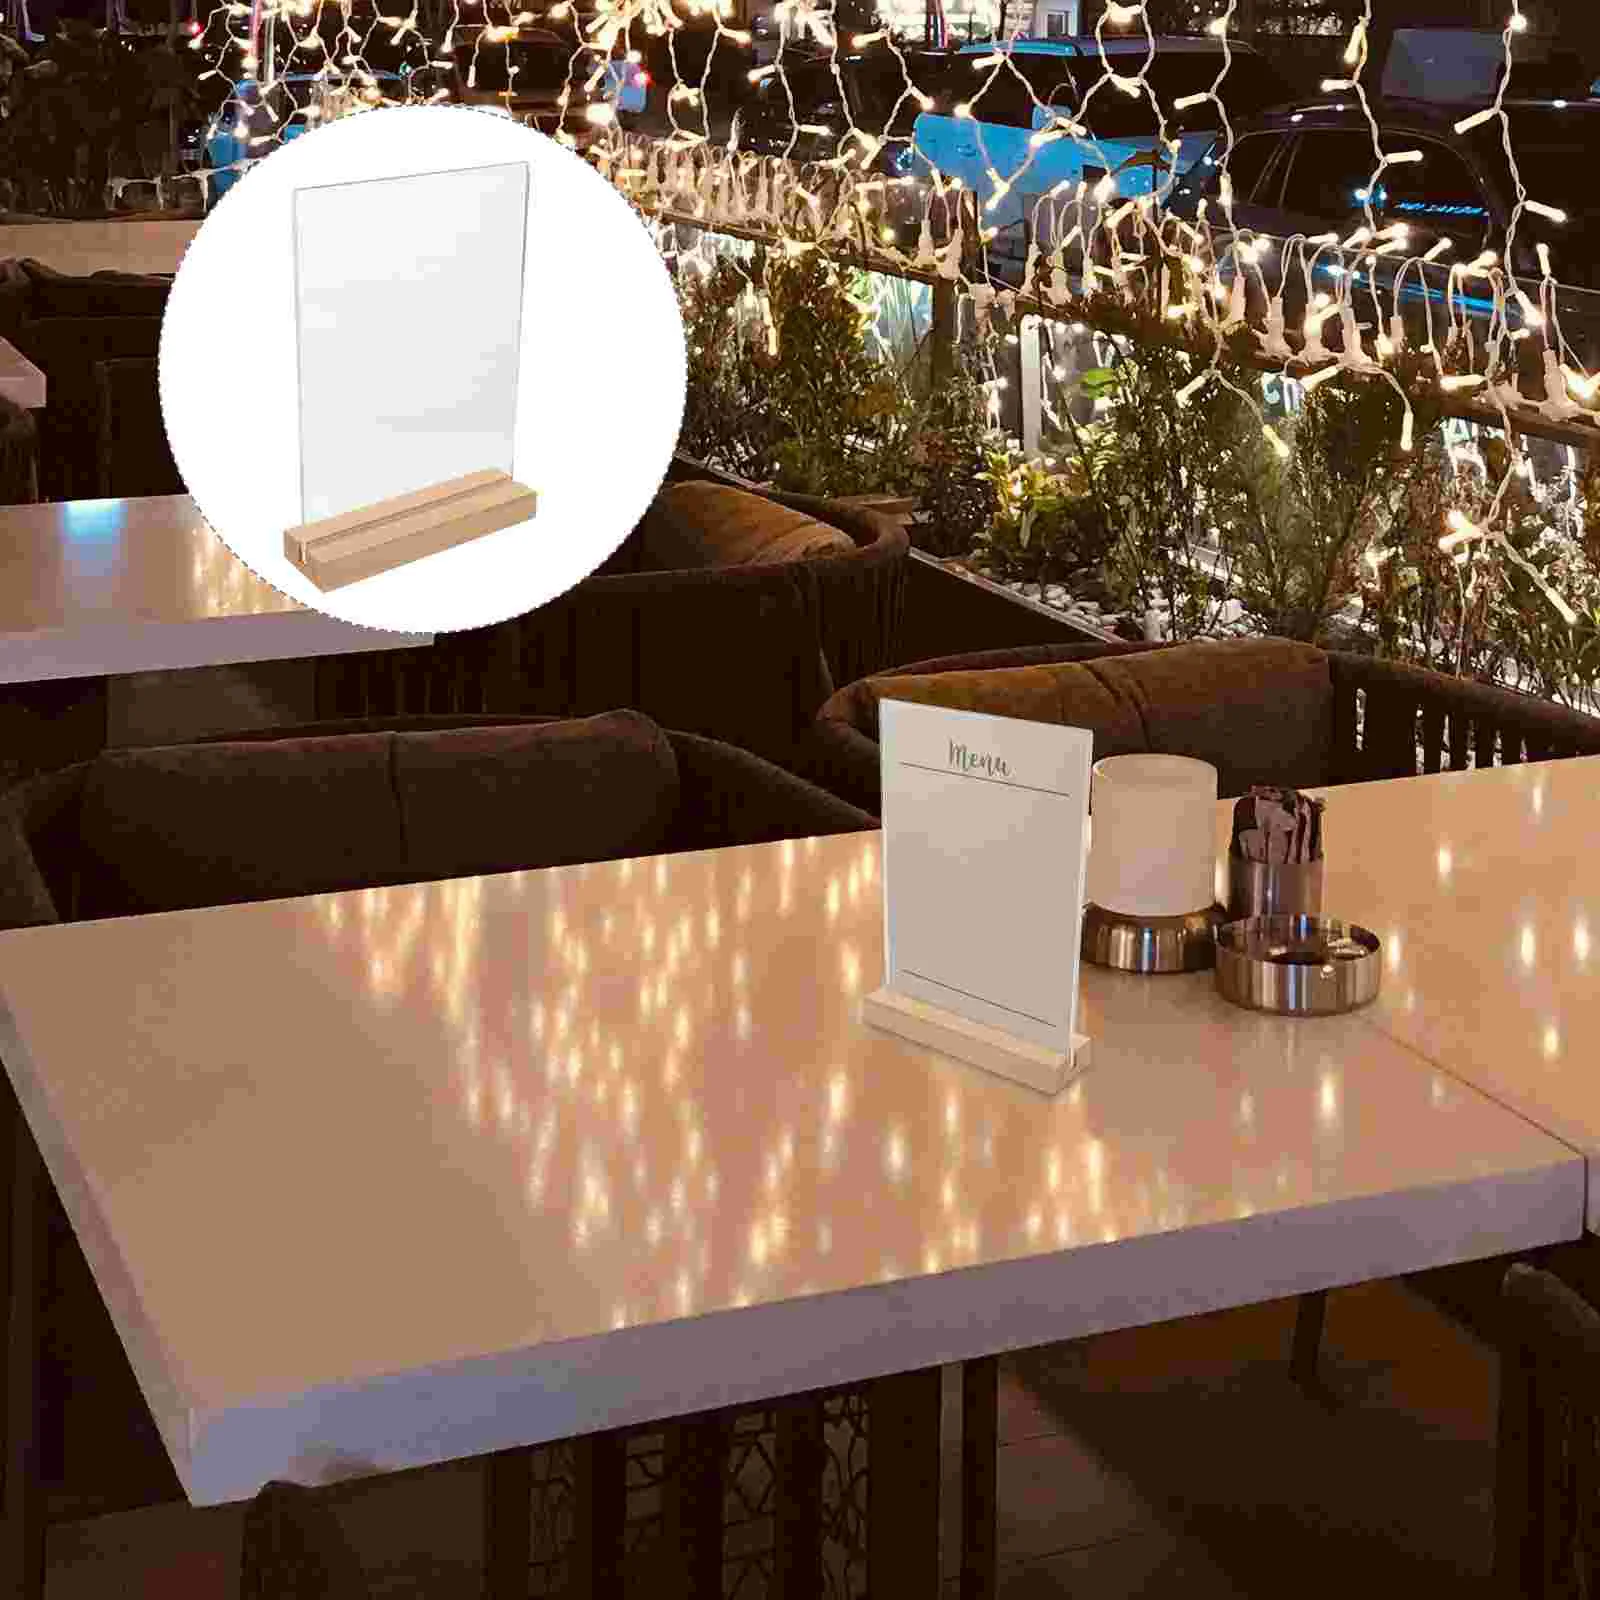 Clear Menu Display Stand Desktop Poster Holder Acrylic Sign Holder for Restaurants with Wood Base 4pcs clear menu display stand desktop poster holder acrylic sign holder for restaurants